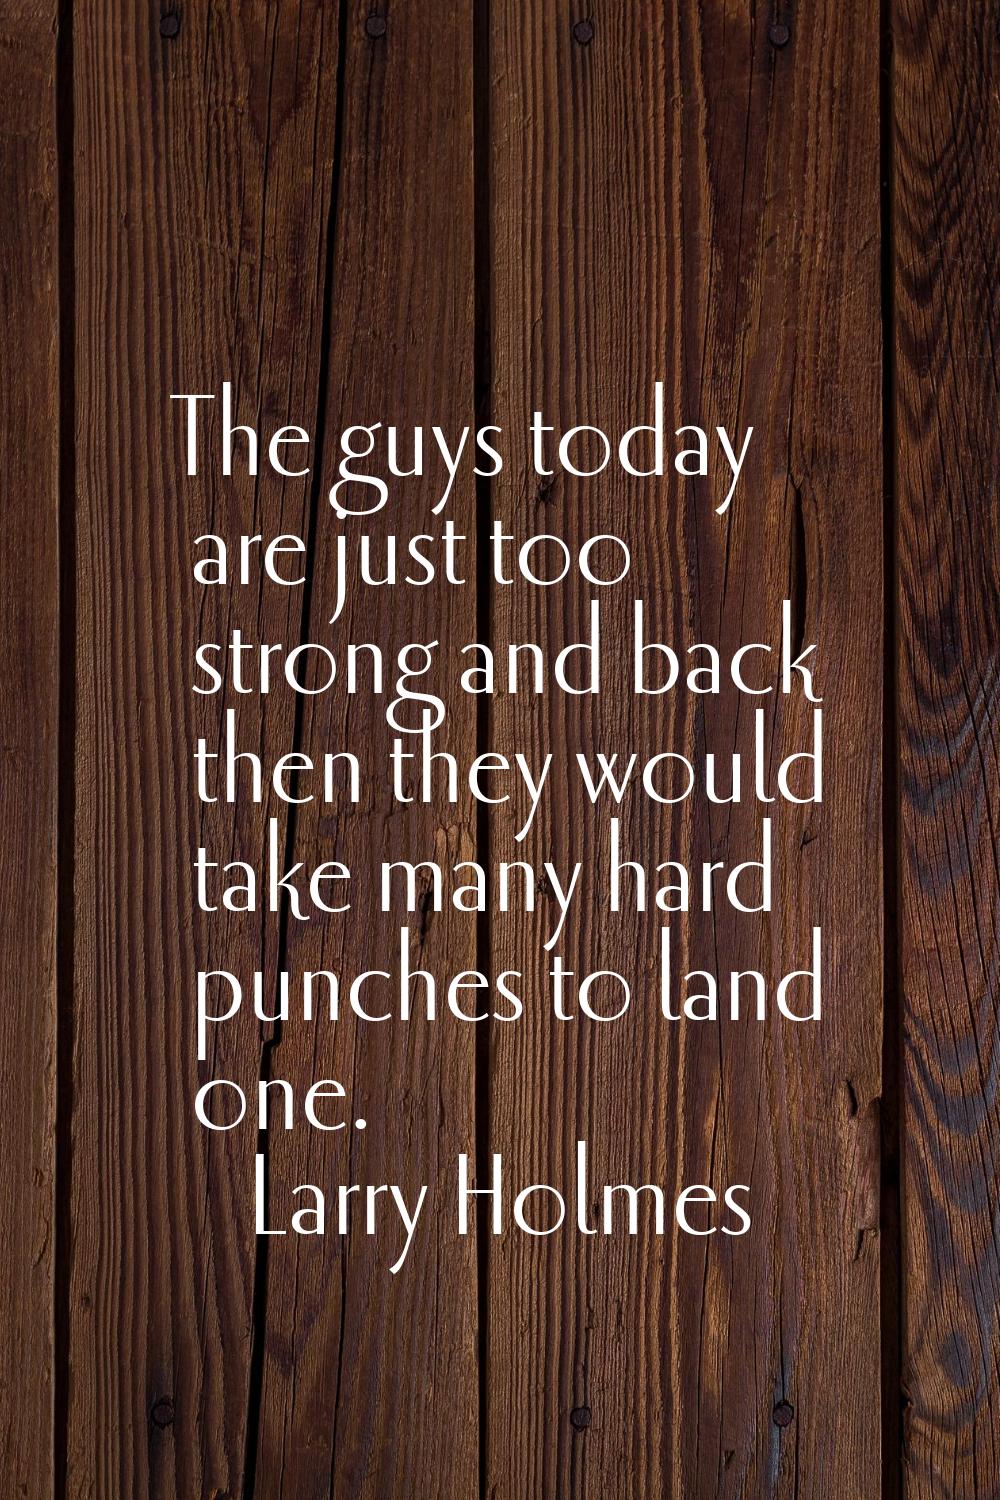 The guys today are just too strong and back then they would take many hard punches to land one.